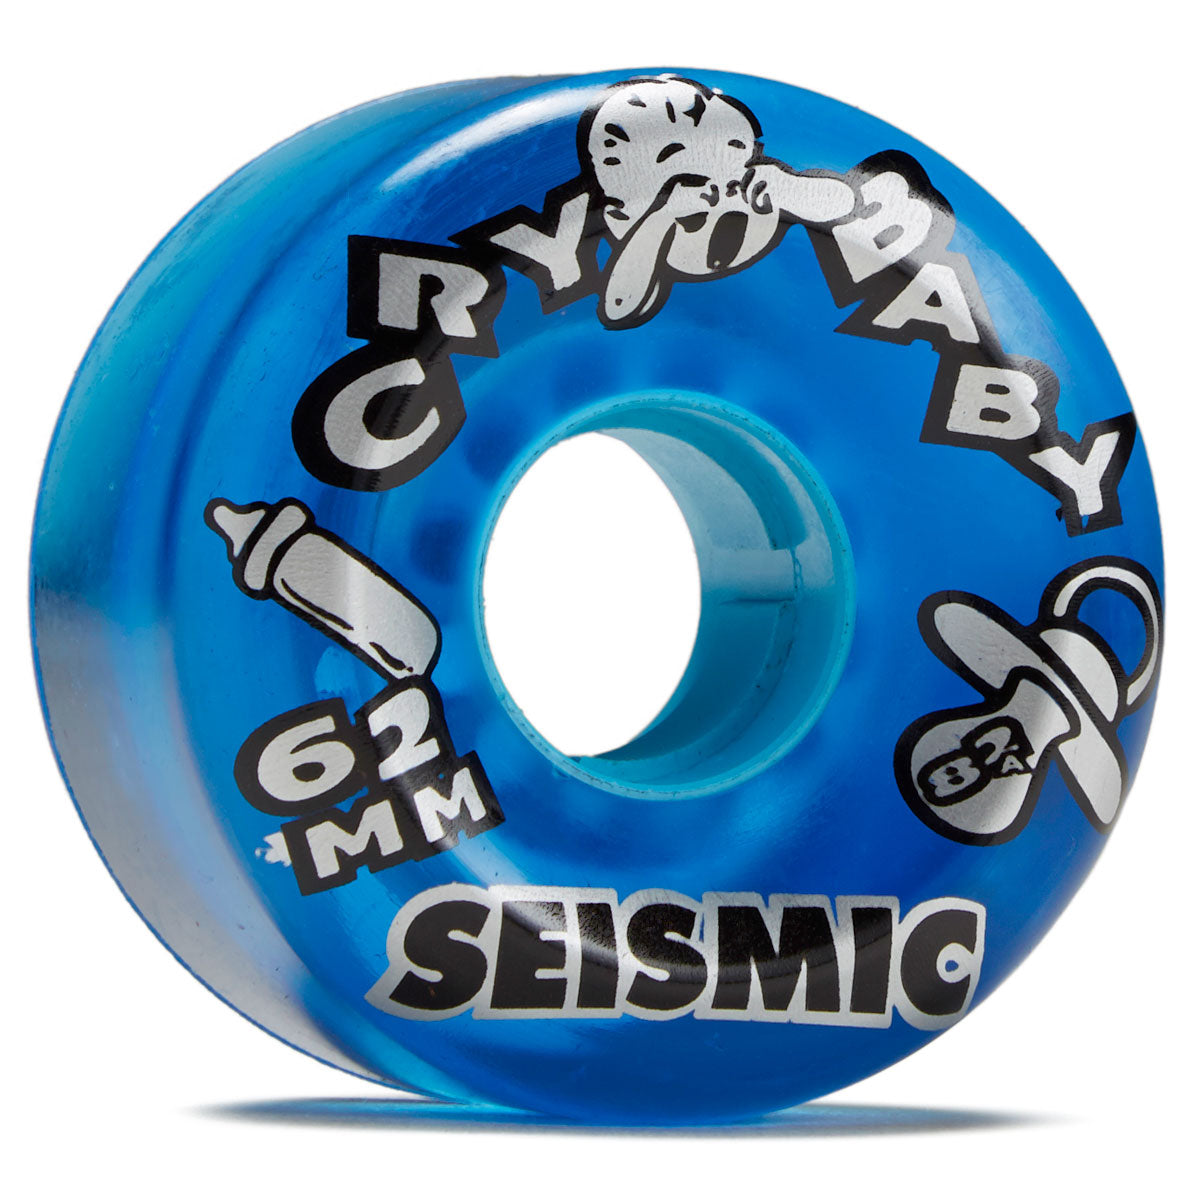 Seismic Crybaby 82a Longboard Wheels - Clear Blue - 62mm image 1